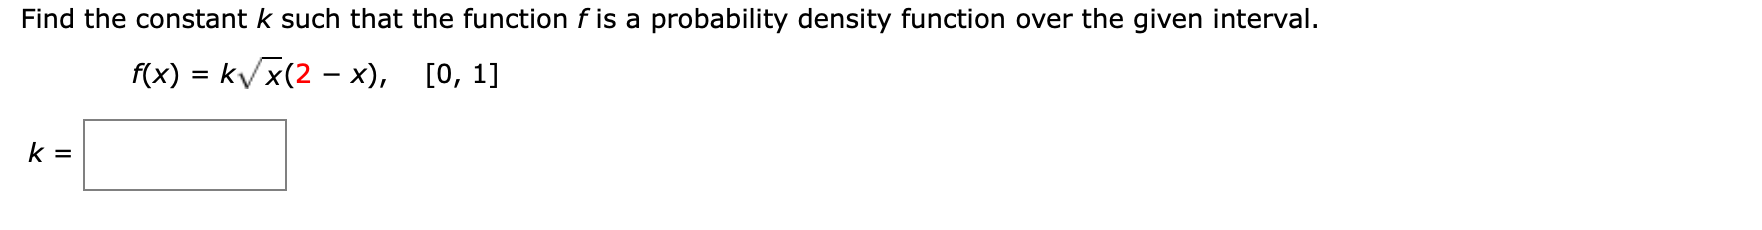 Find the constant k such that the function f is a probability density function over the given interval.
f(x) = k/x(2 – x), [0, 1]
